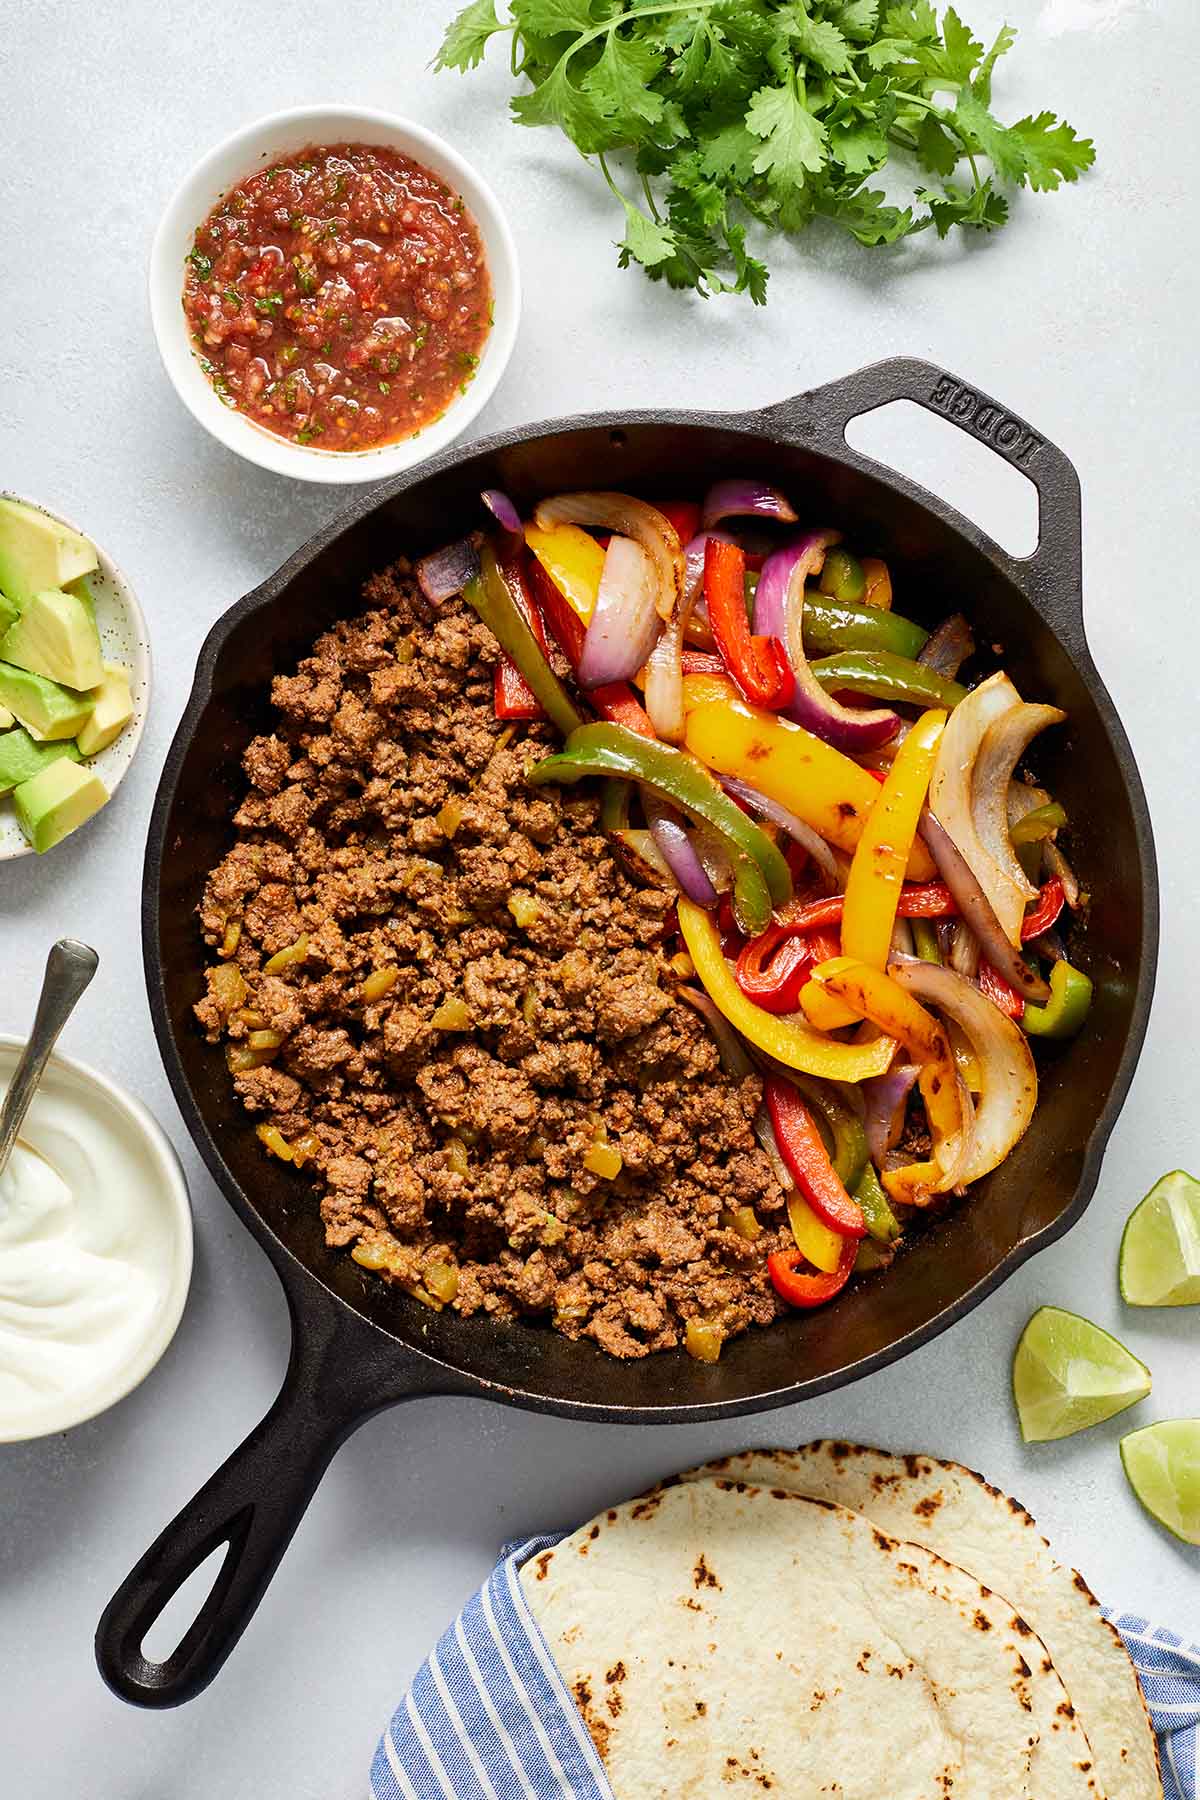 Ground beef, peppers and onions in a cast iron pan with fajita toppings surrounding it.